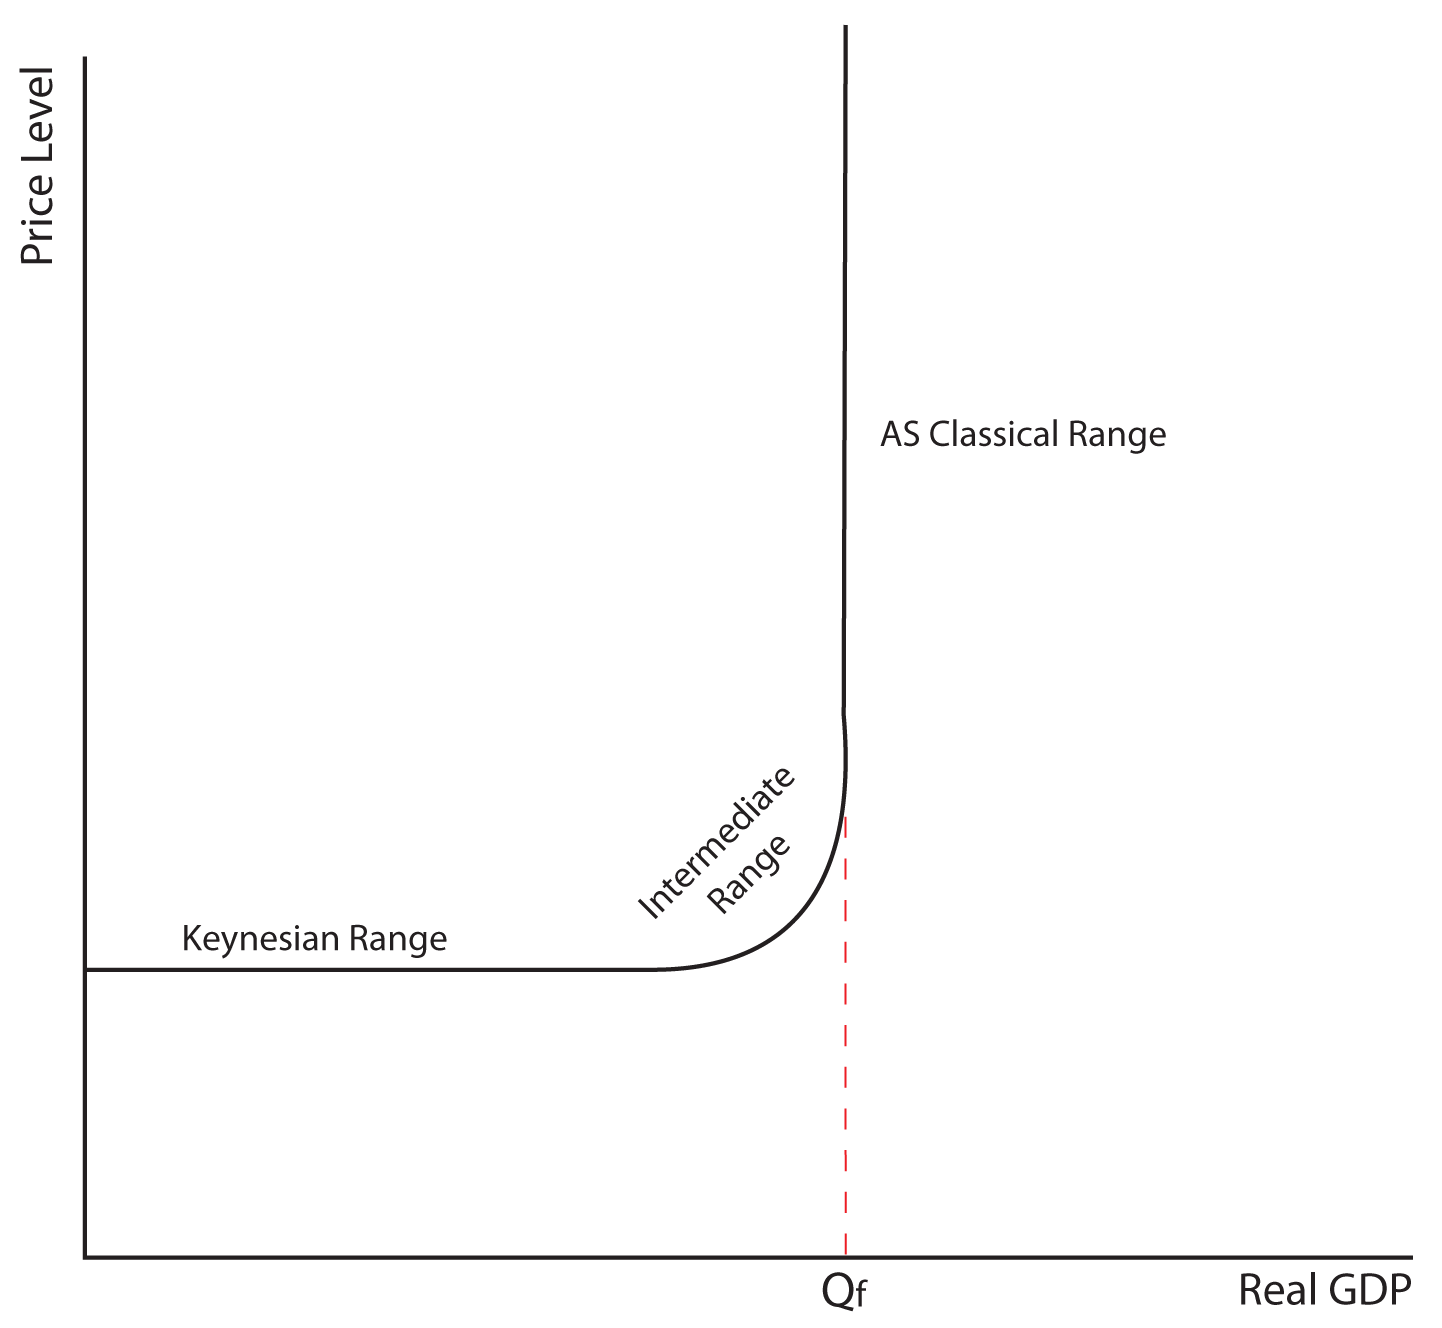 Image 8.03: The image shows a graph. The y axis is labeled Price Level. The x axis is labeled Real GDP. There is an irregularly curved line drawn on the graph. The line starts out horizontal the line curves up at point Qf on the x axis, and then continues vertically. The horizontal portion of the graph is labeled Keynesian Range, the curved portion is labeled Intermediate Range, and the vertical portion is labeled AS classical range.